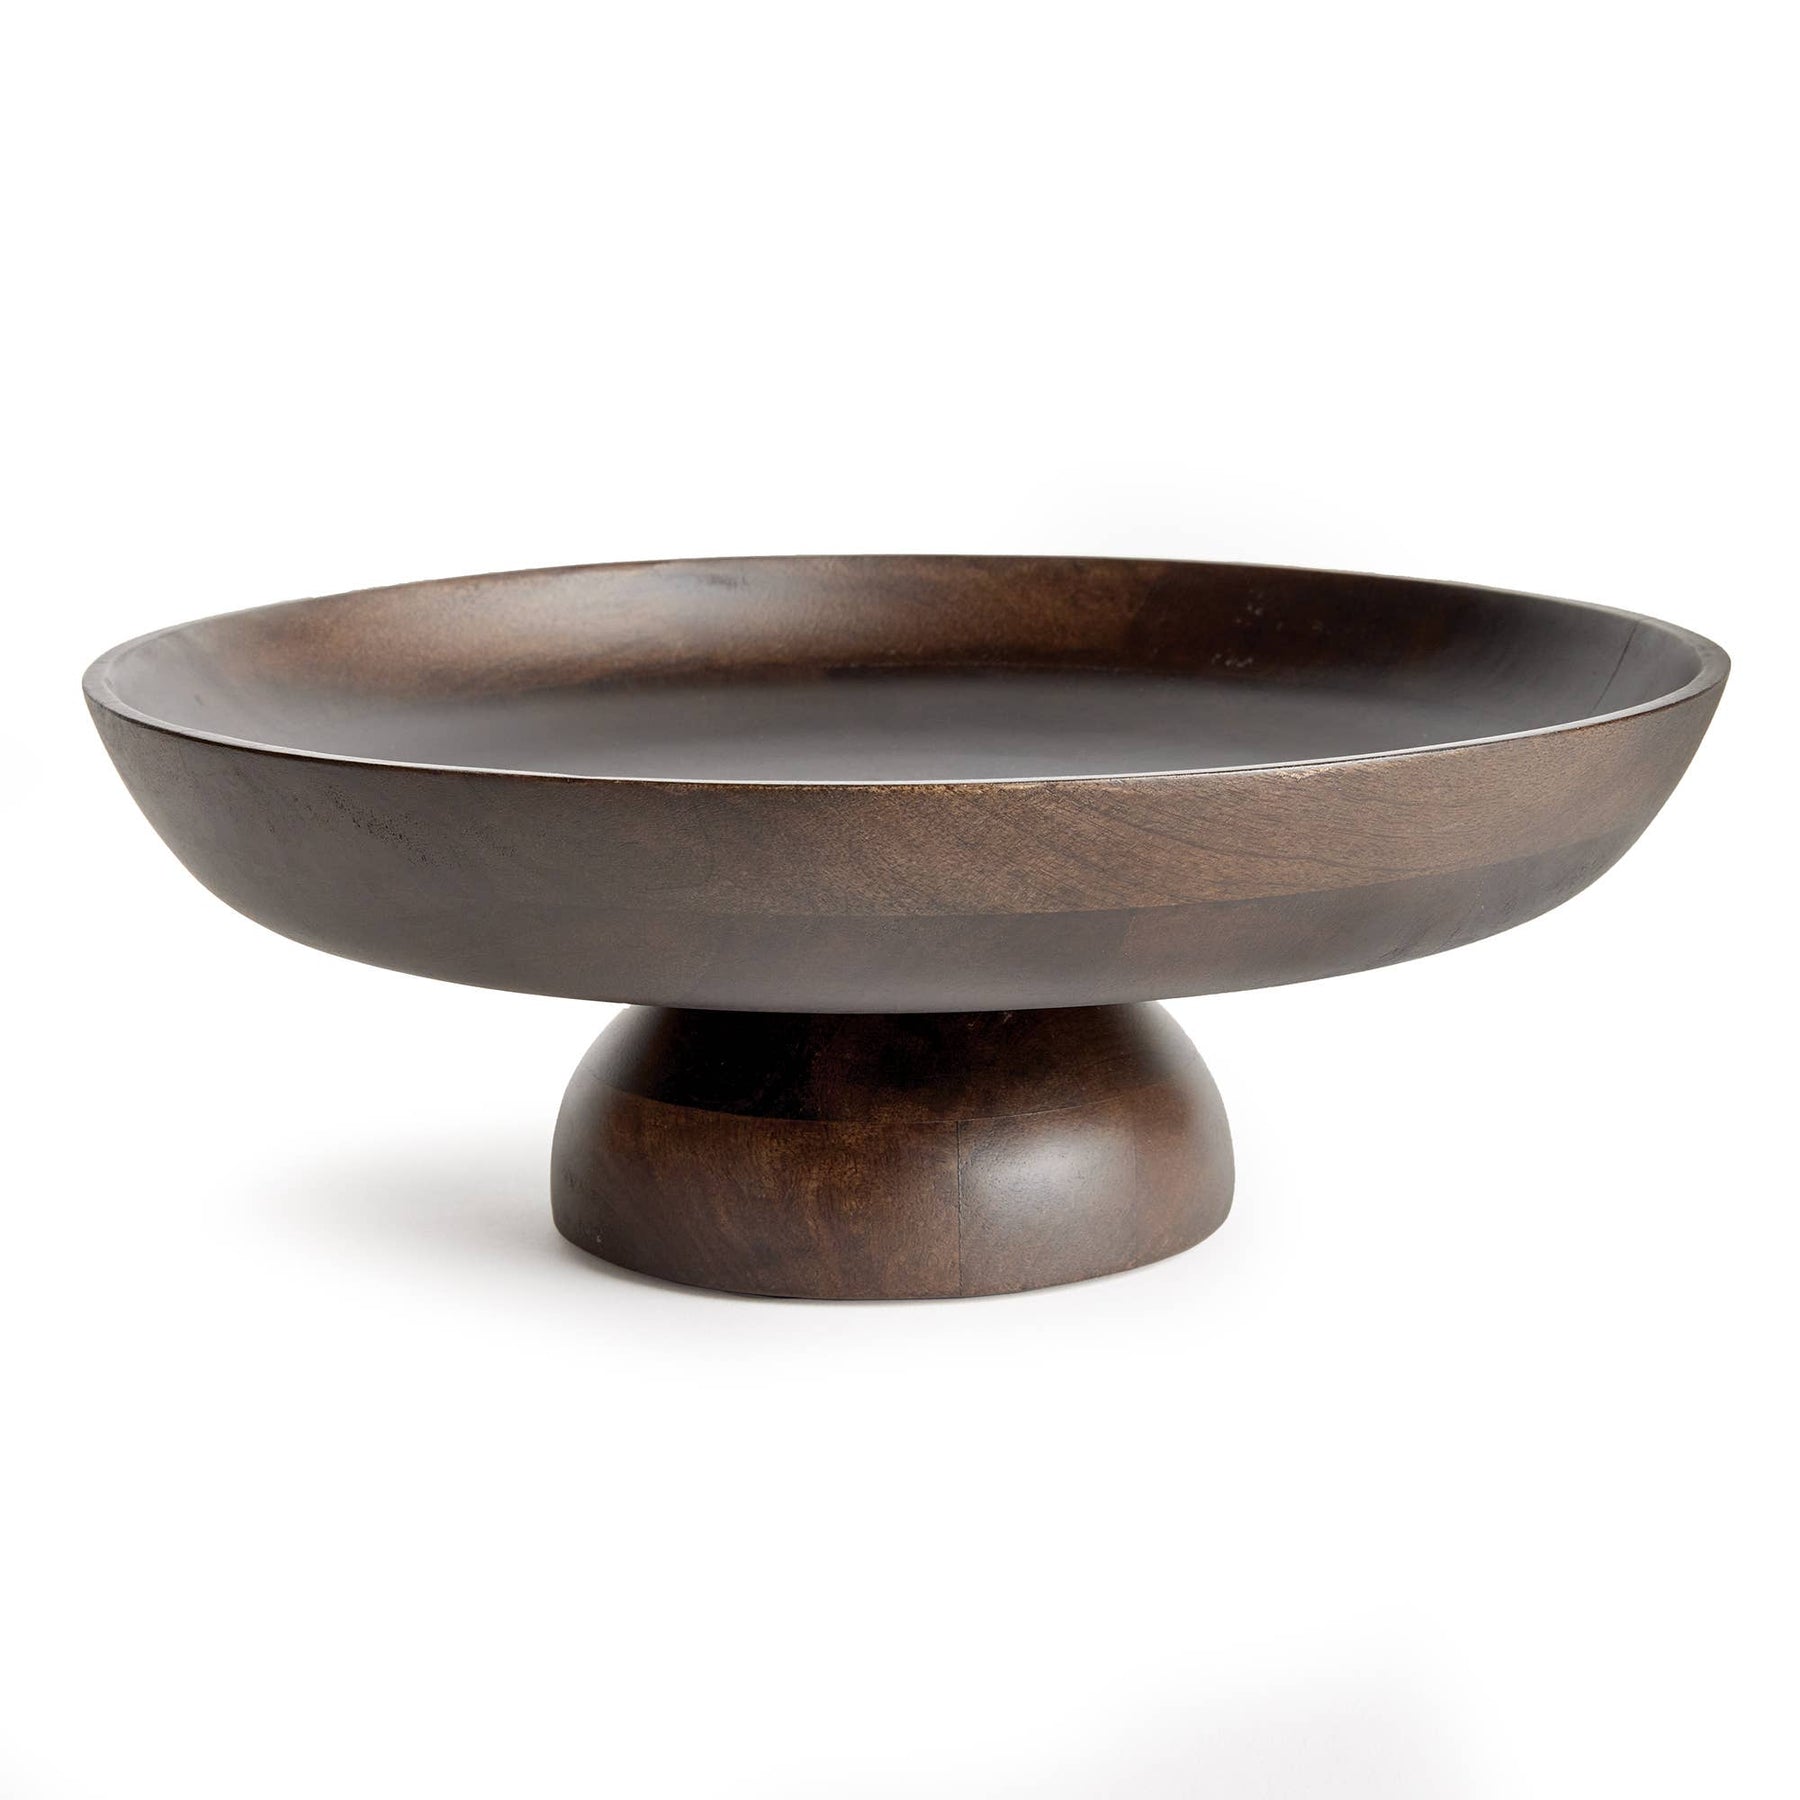 Bowie Footed Bowl, Washed Black